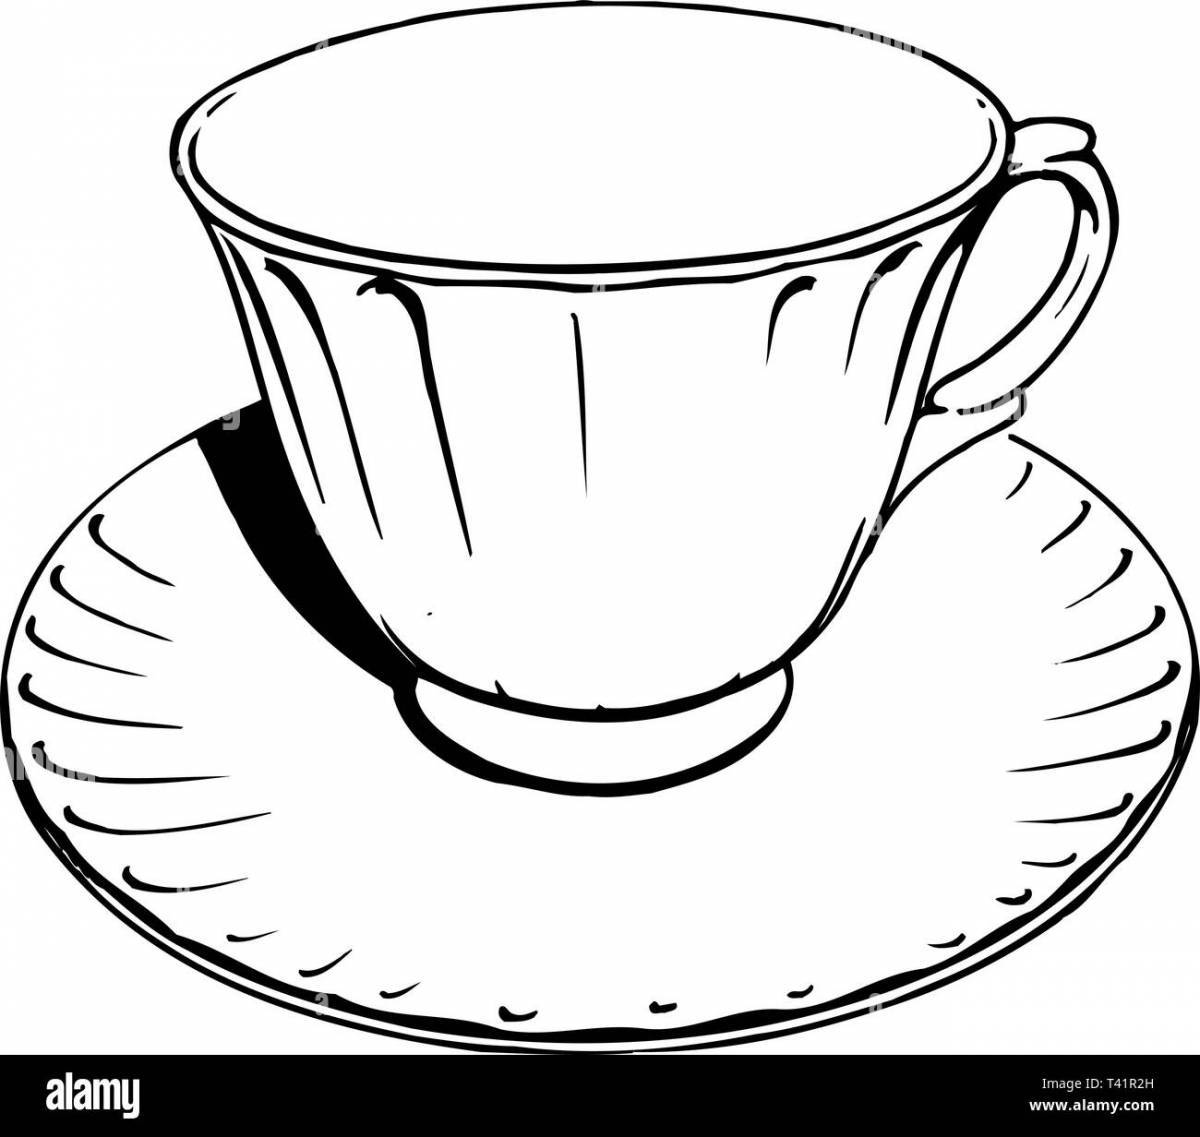 Adorable cup and saucer coloring page